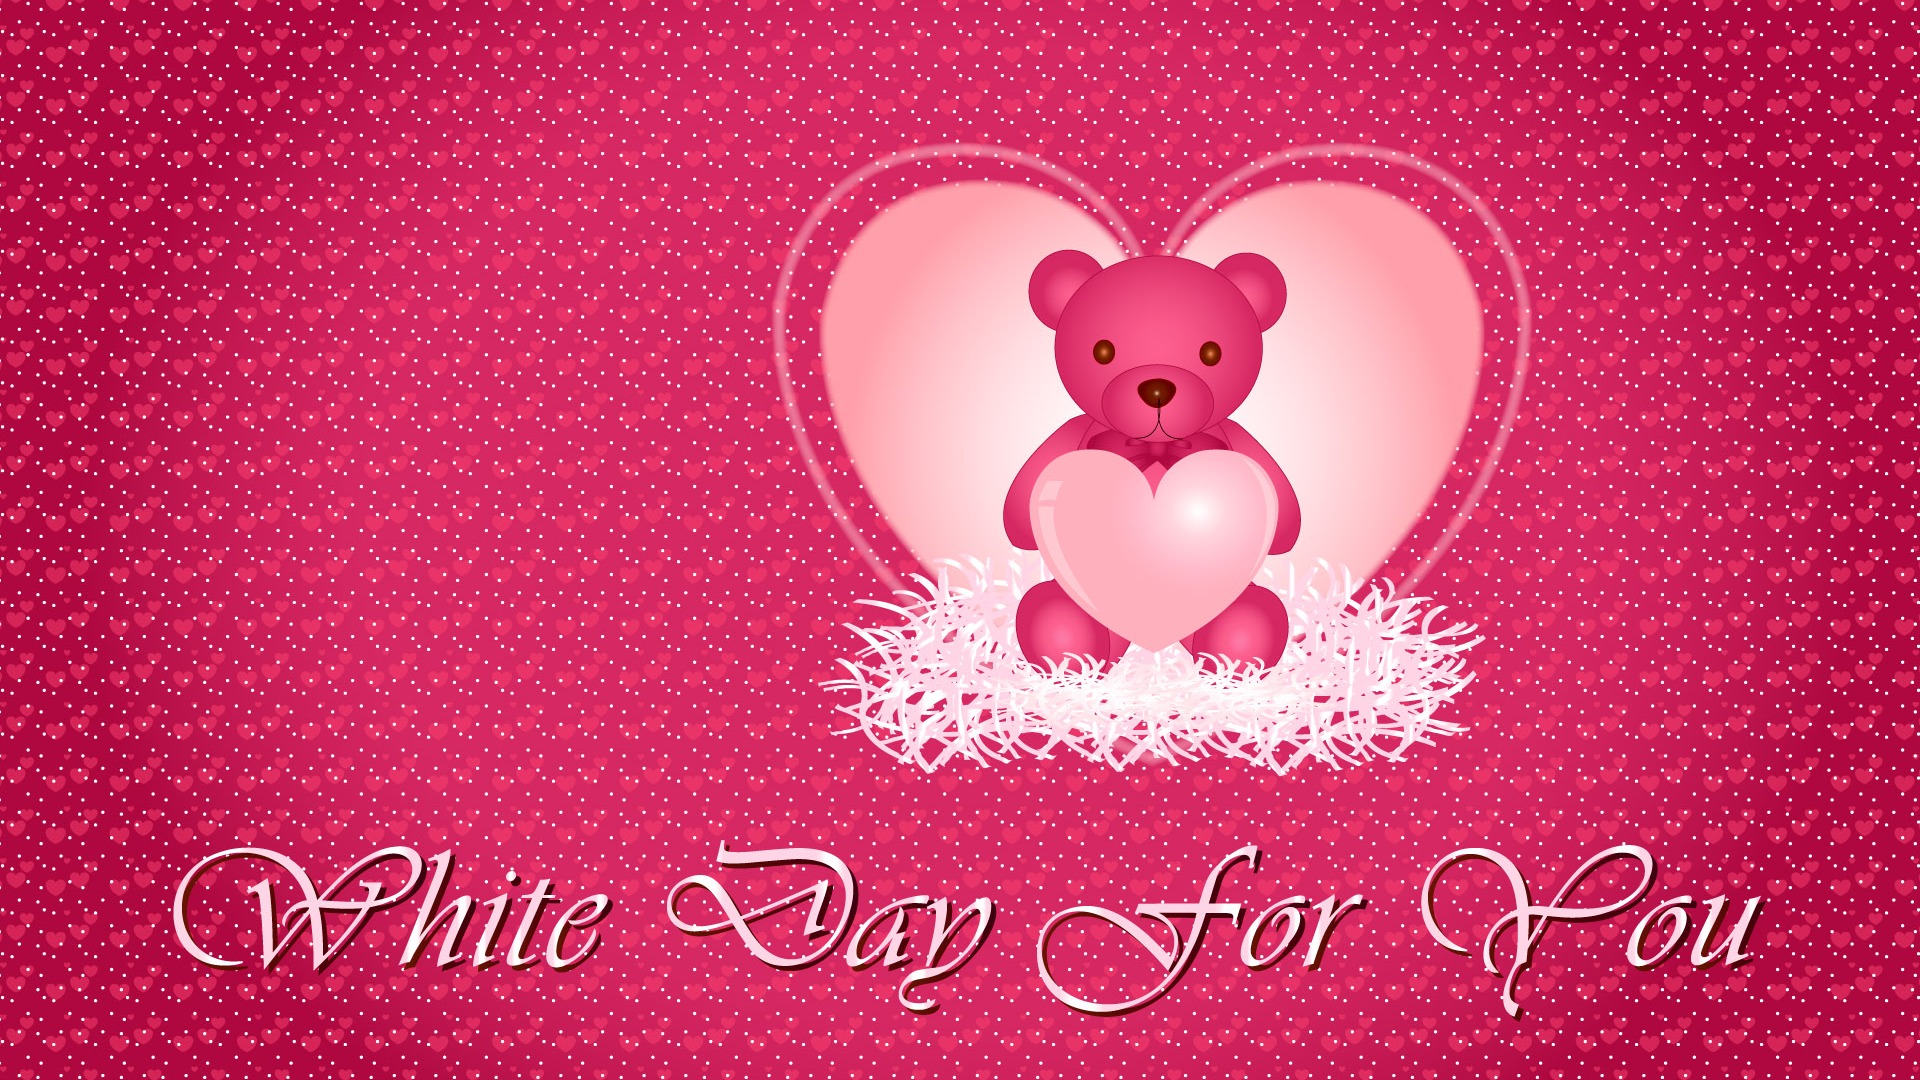 Valentine's Day Theme Wallpapers (2) #2 - 1920x1080